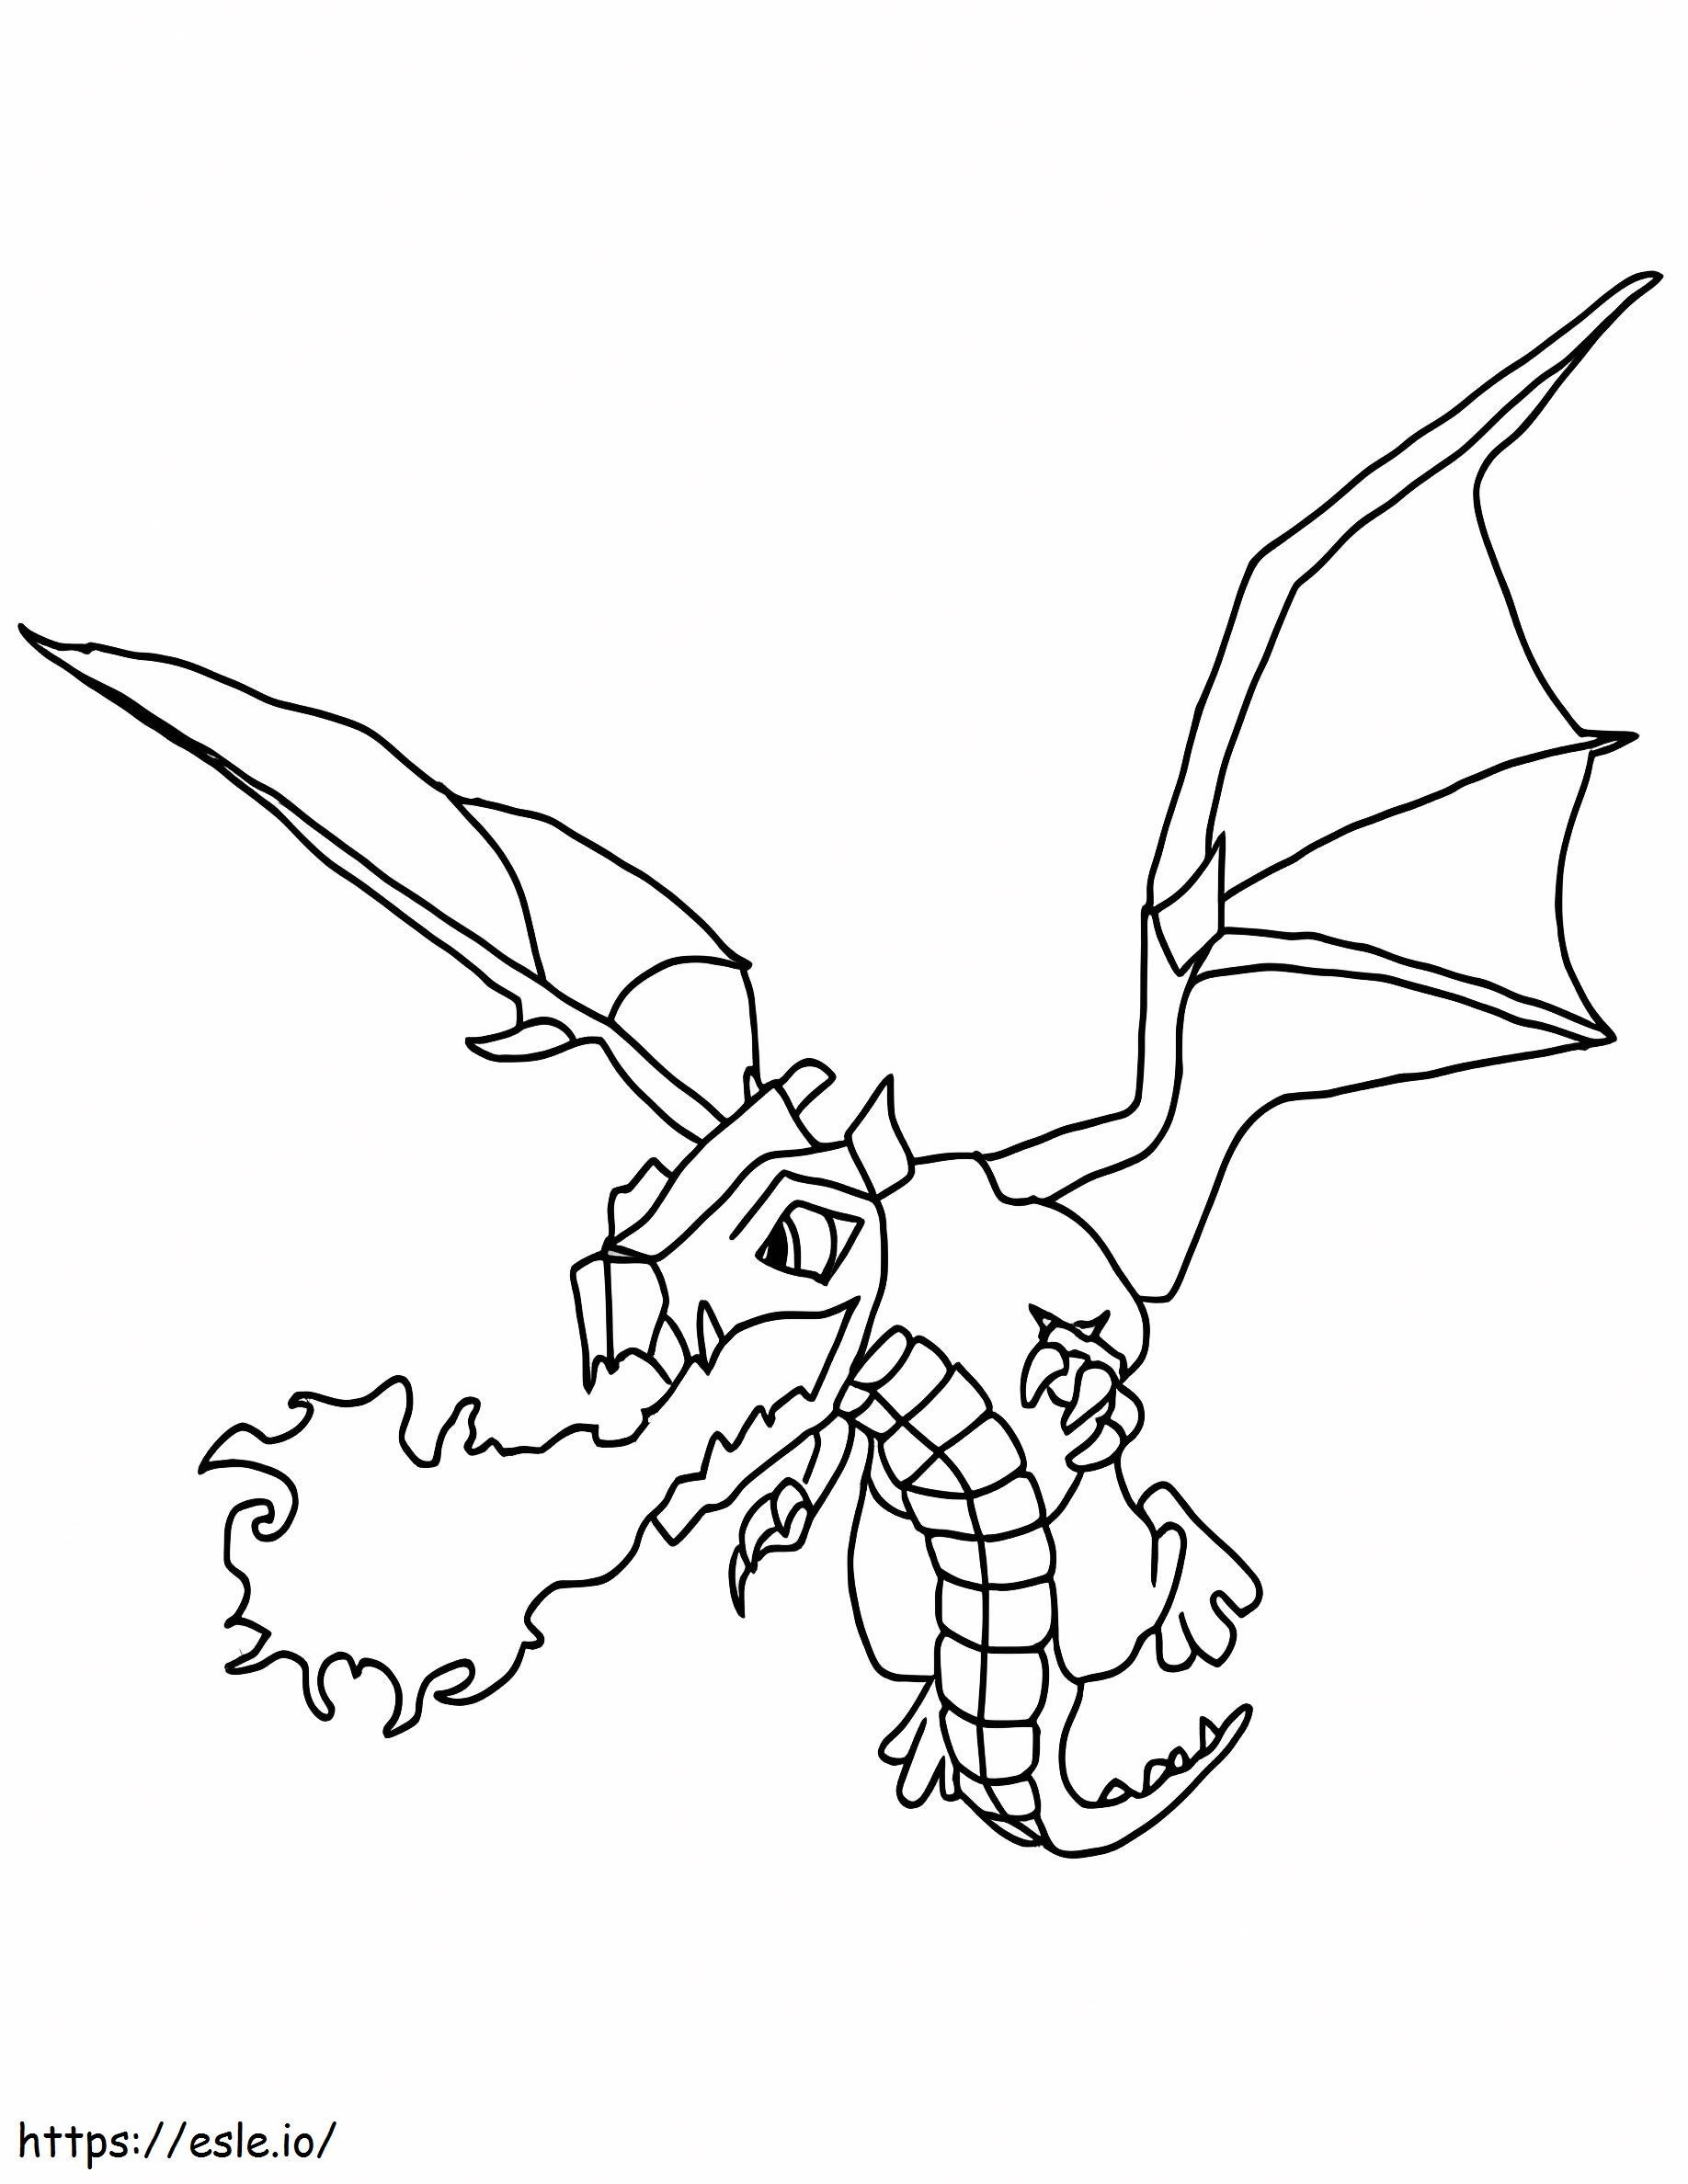 Dragon Army coloring page